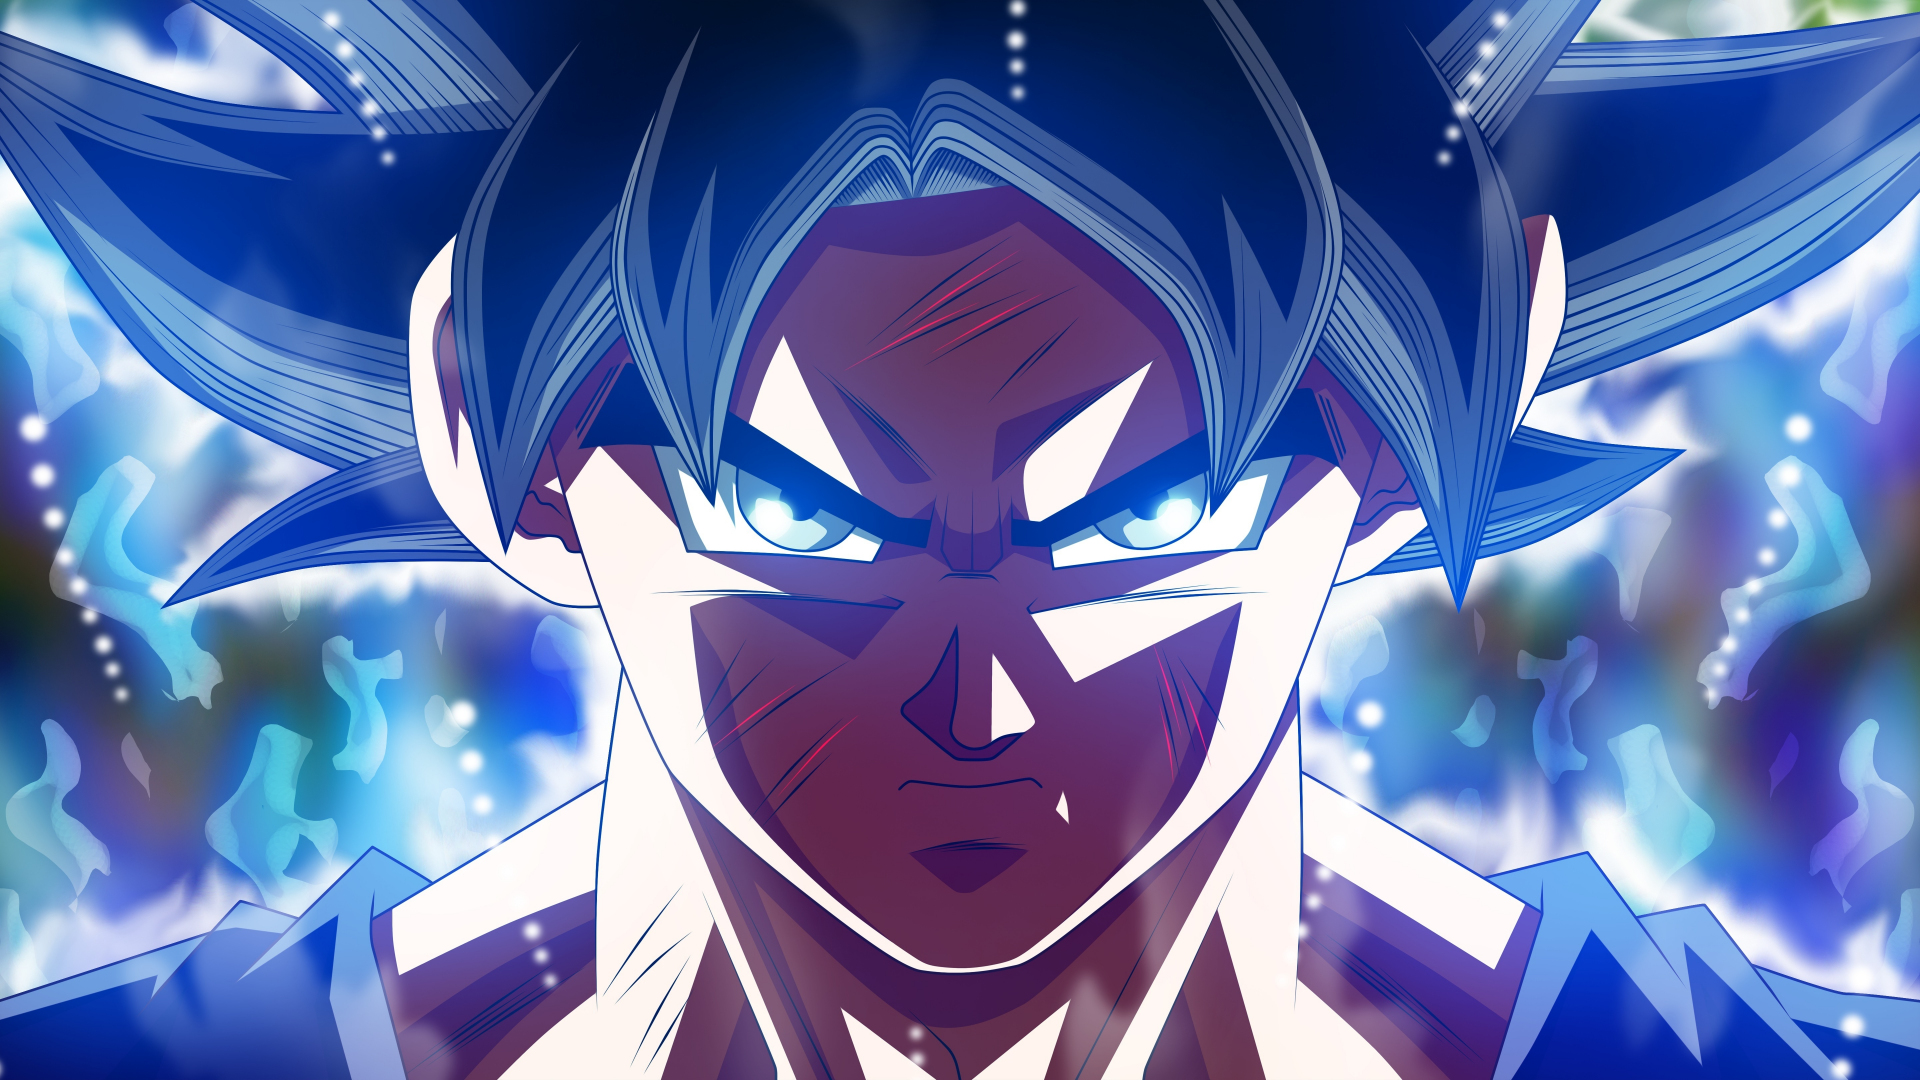 Download 1920x1080 Wallpaper Wounded Son Goku Ultra